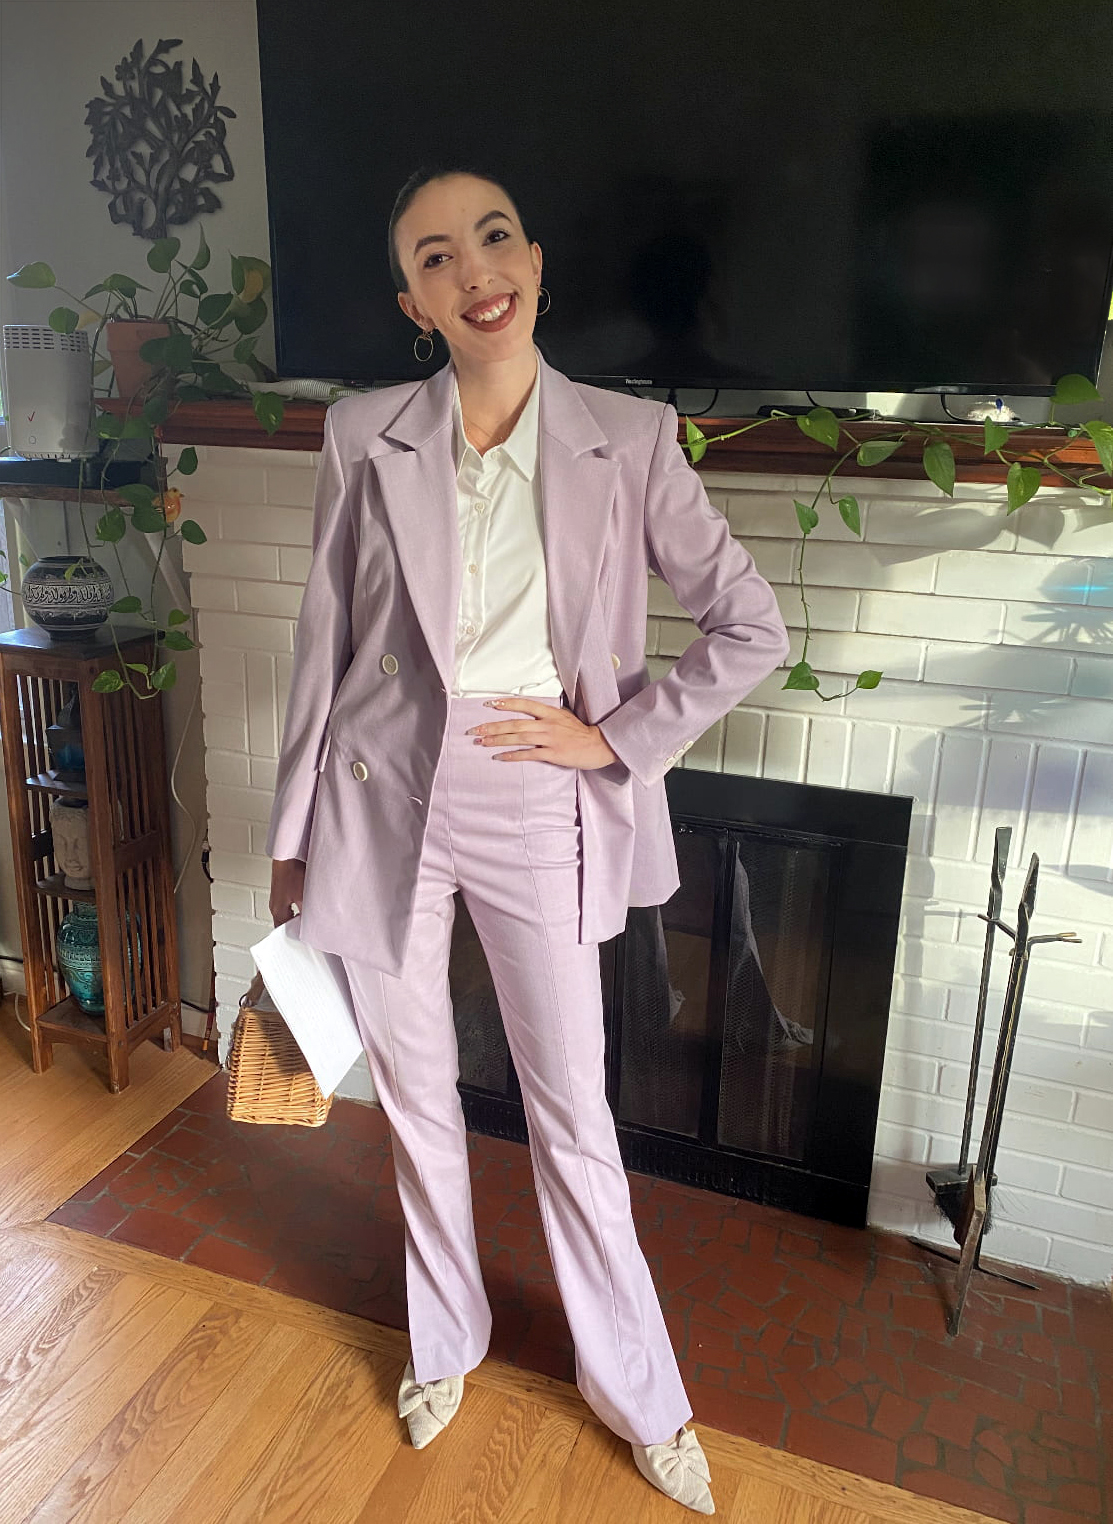 person with brown hair and earrings in a lavender suit standing in a living room, hand on hip and smiling